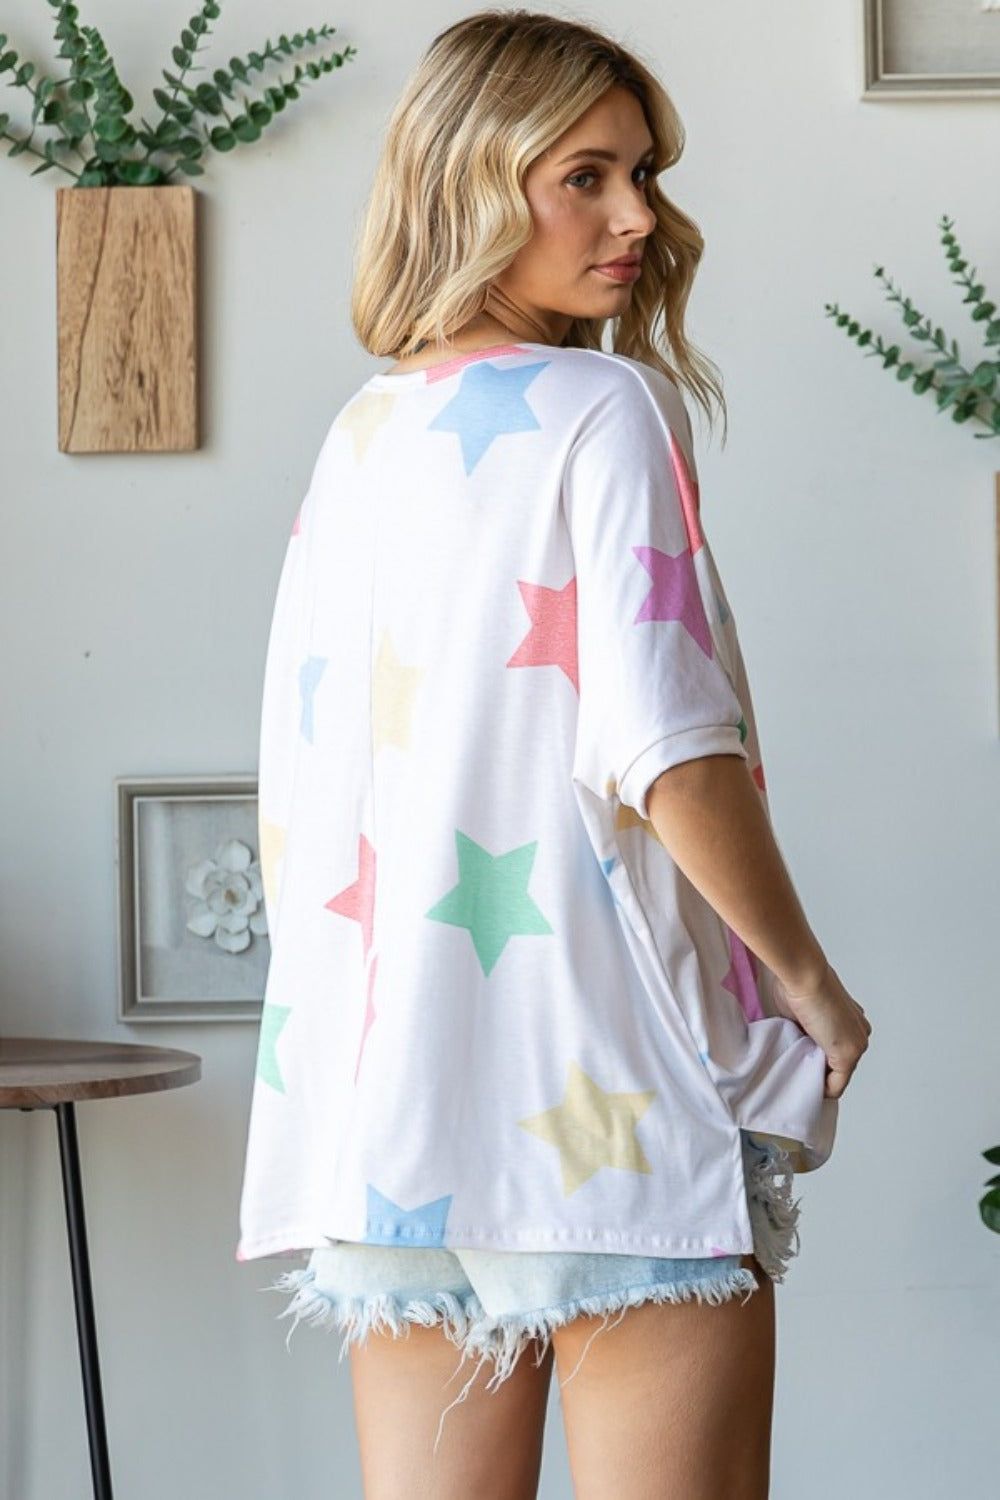 HOPELY Full Size Multi Colored Star Print T-Shirt - us.meeeshop